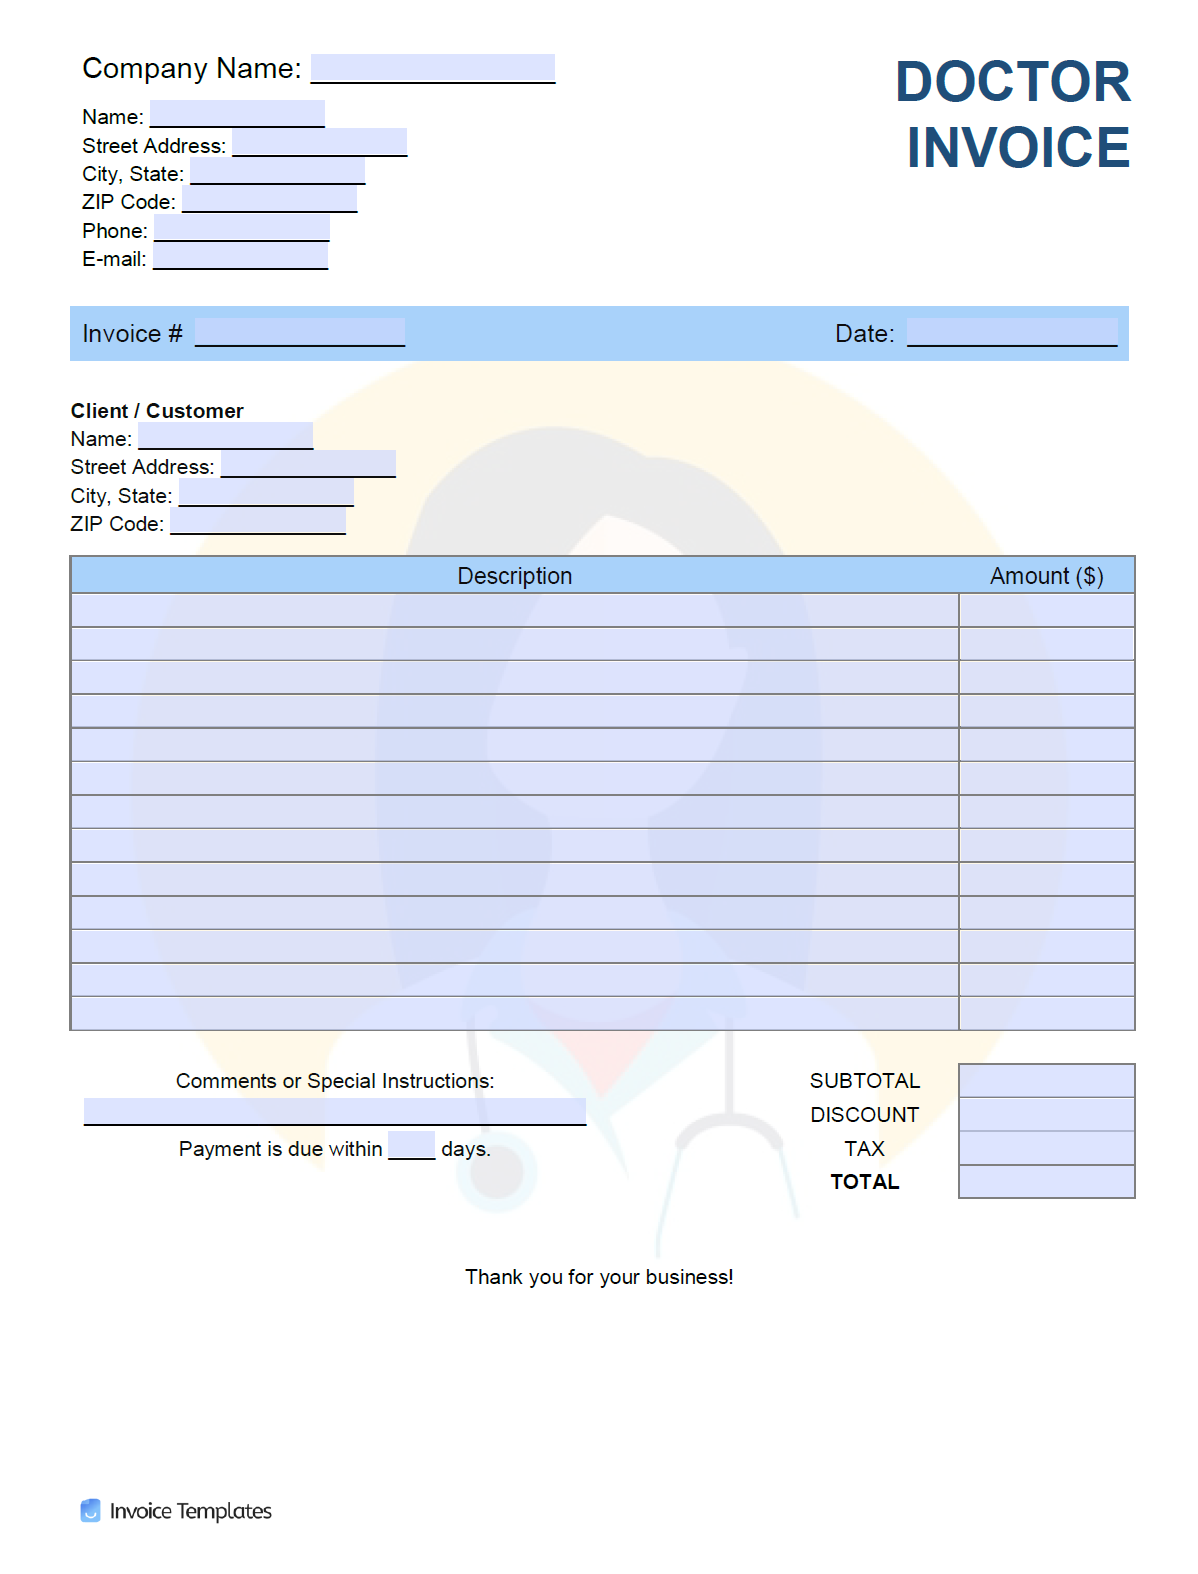 Free Doctor (Physician) Invoice Template  PDF  WORD  EXCEL Intended For Doctors Invoice Template